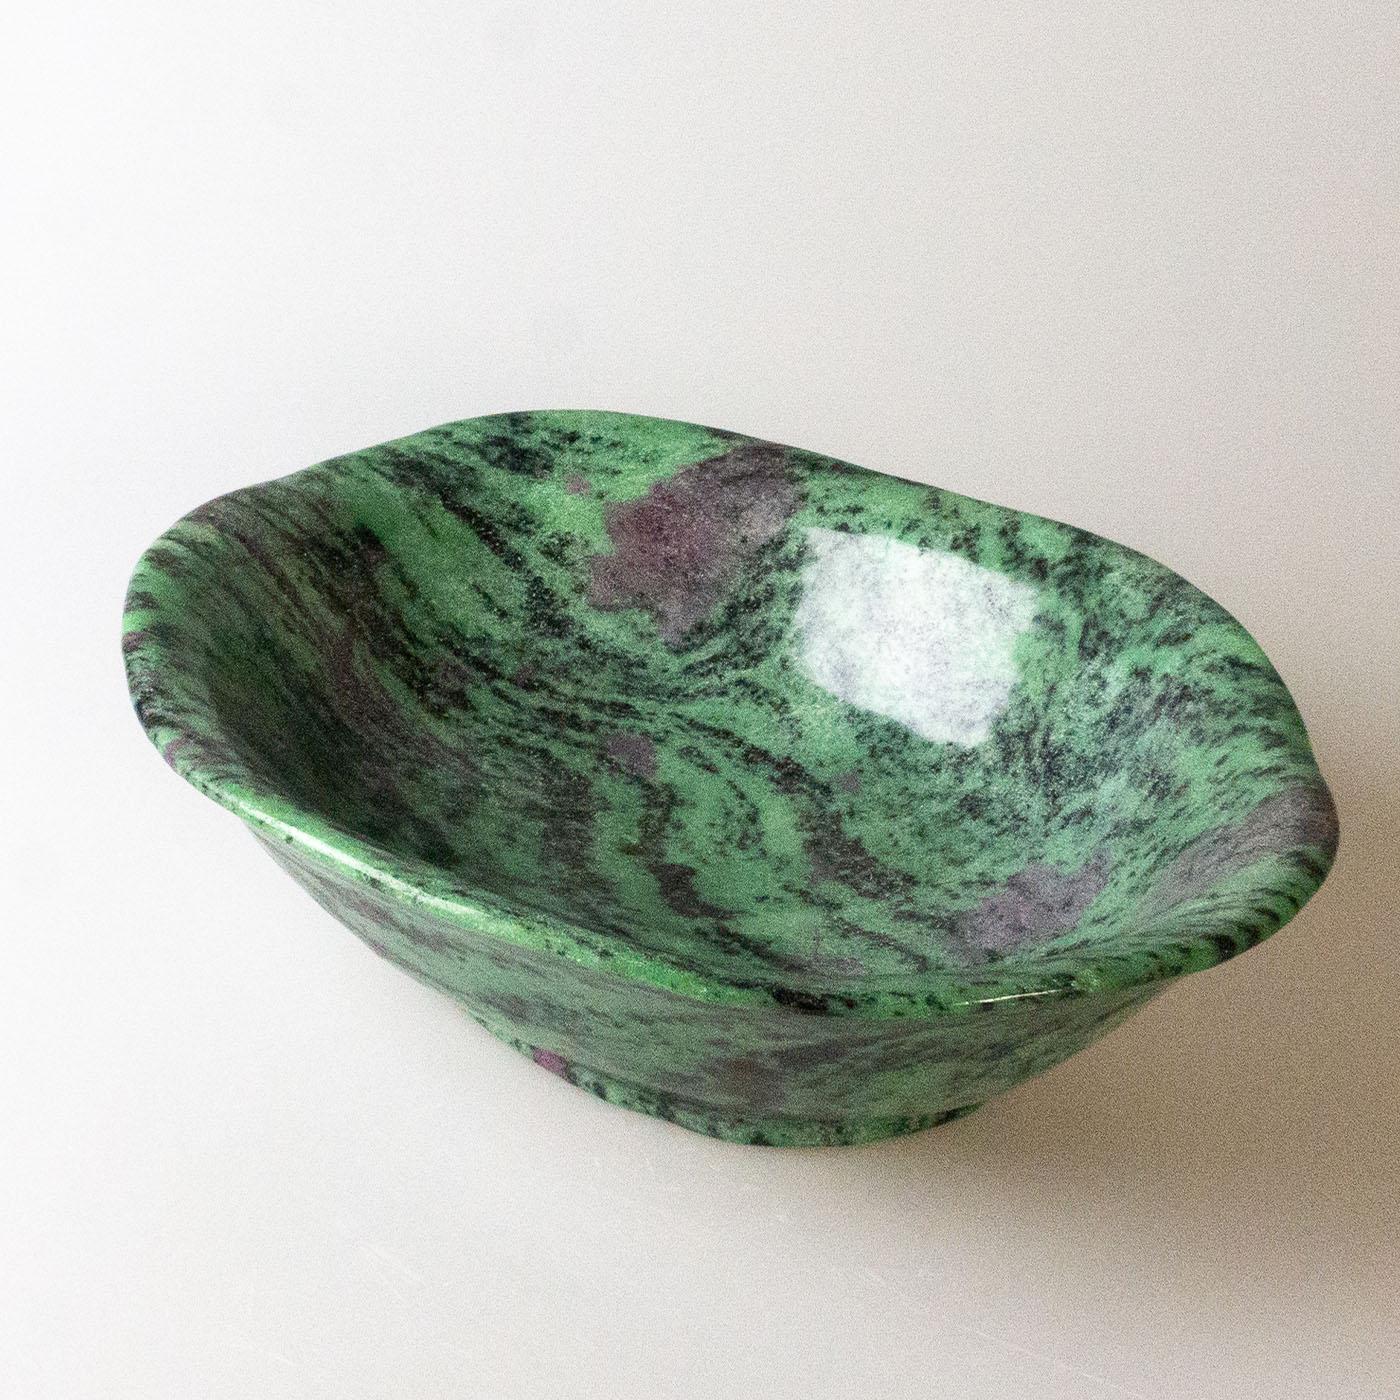 Cup with an irregular shape, made from a single block of zoisite ruby. The stone has a profound meaning: it gives freedom of thought, love for existence, confidence, physical strength, ability to concentrate, and will to win. It heals negative